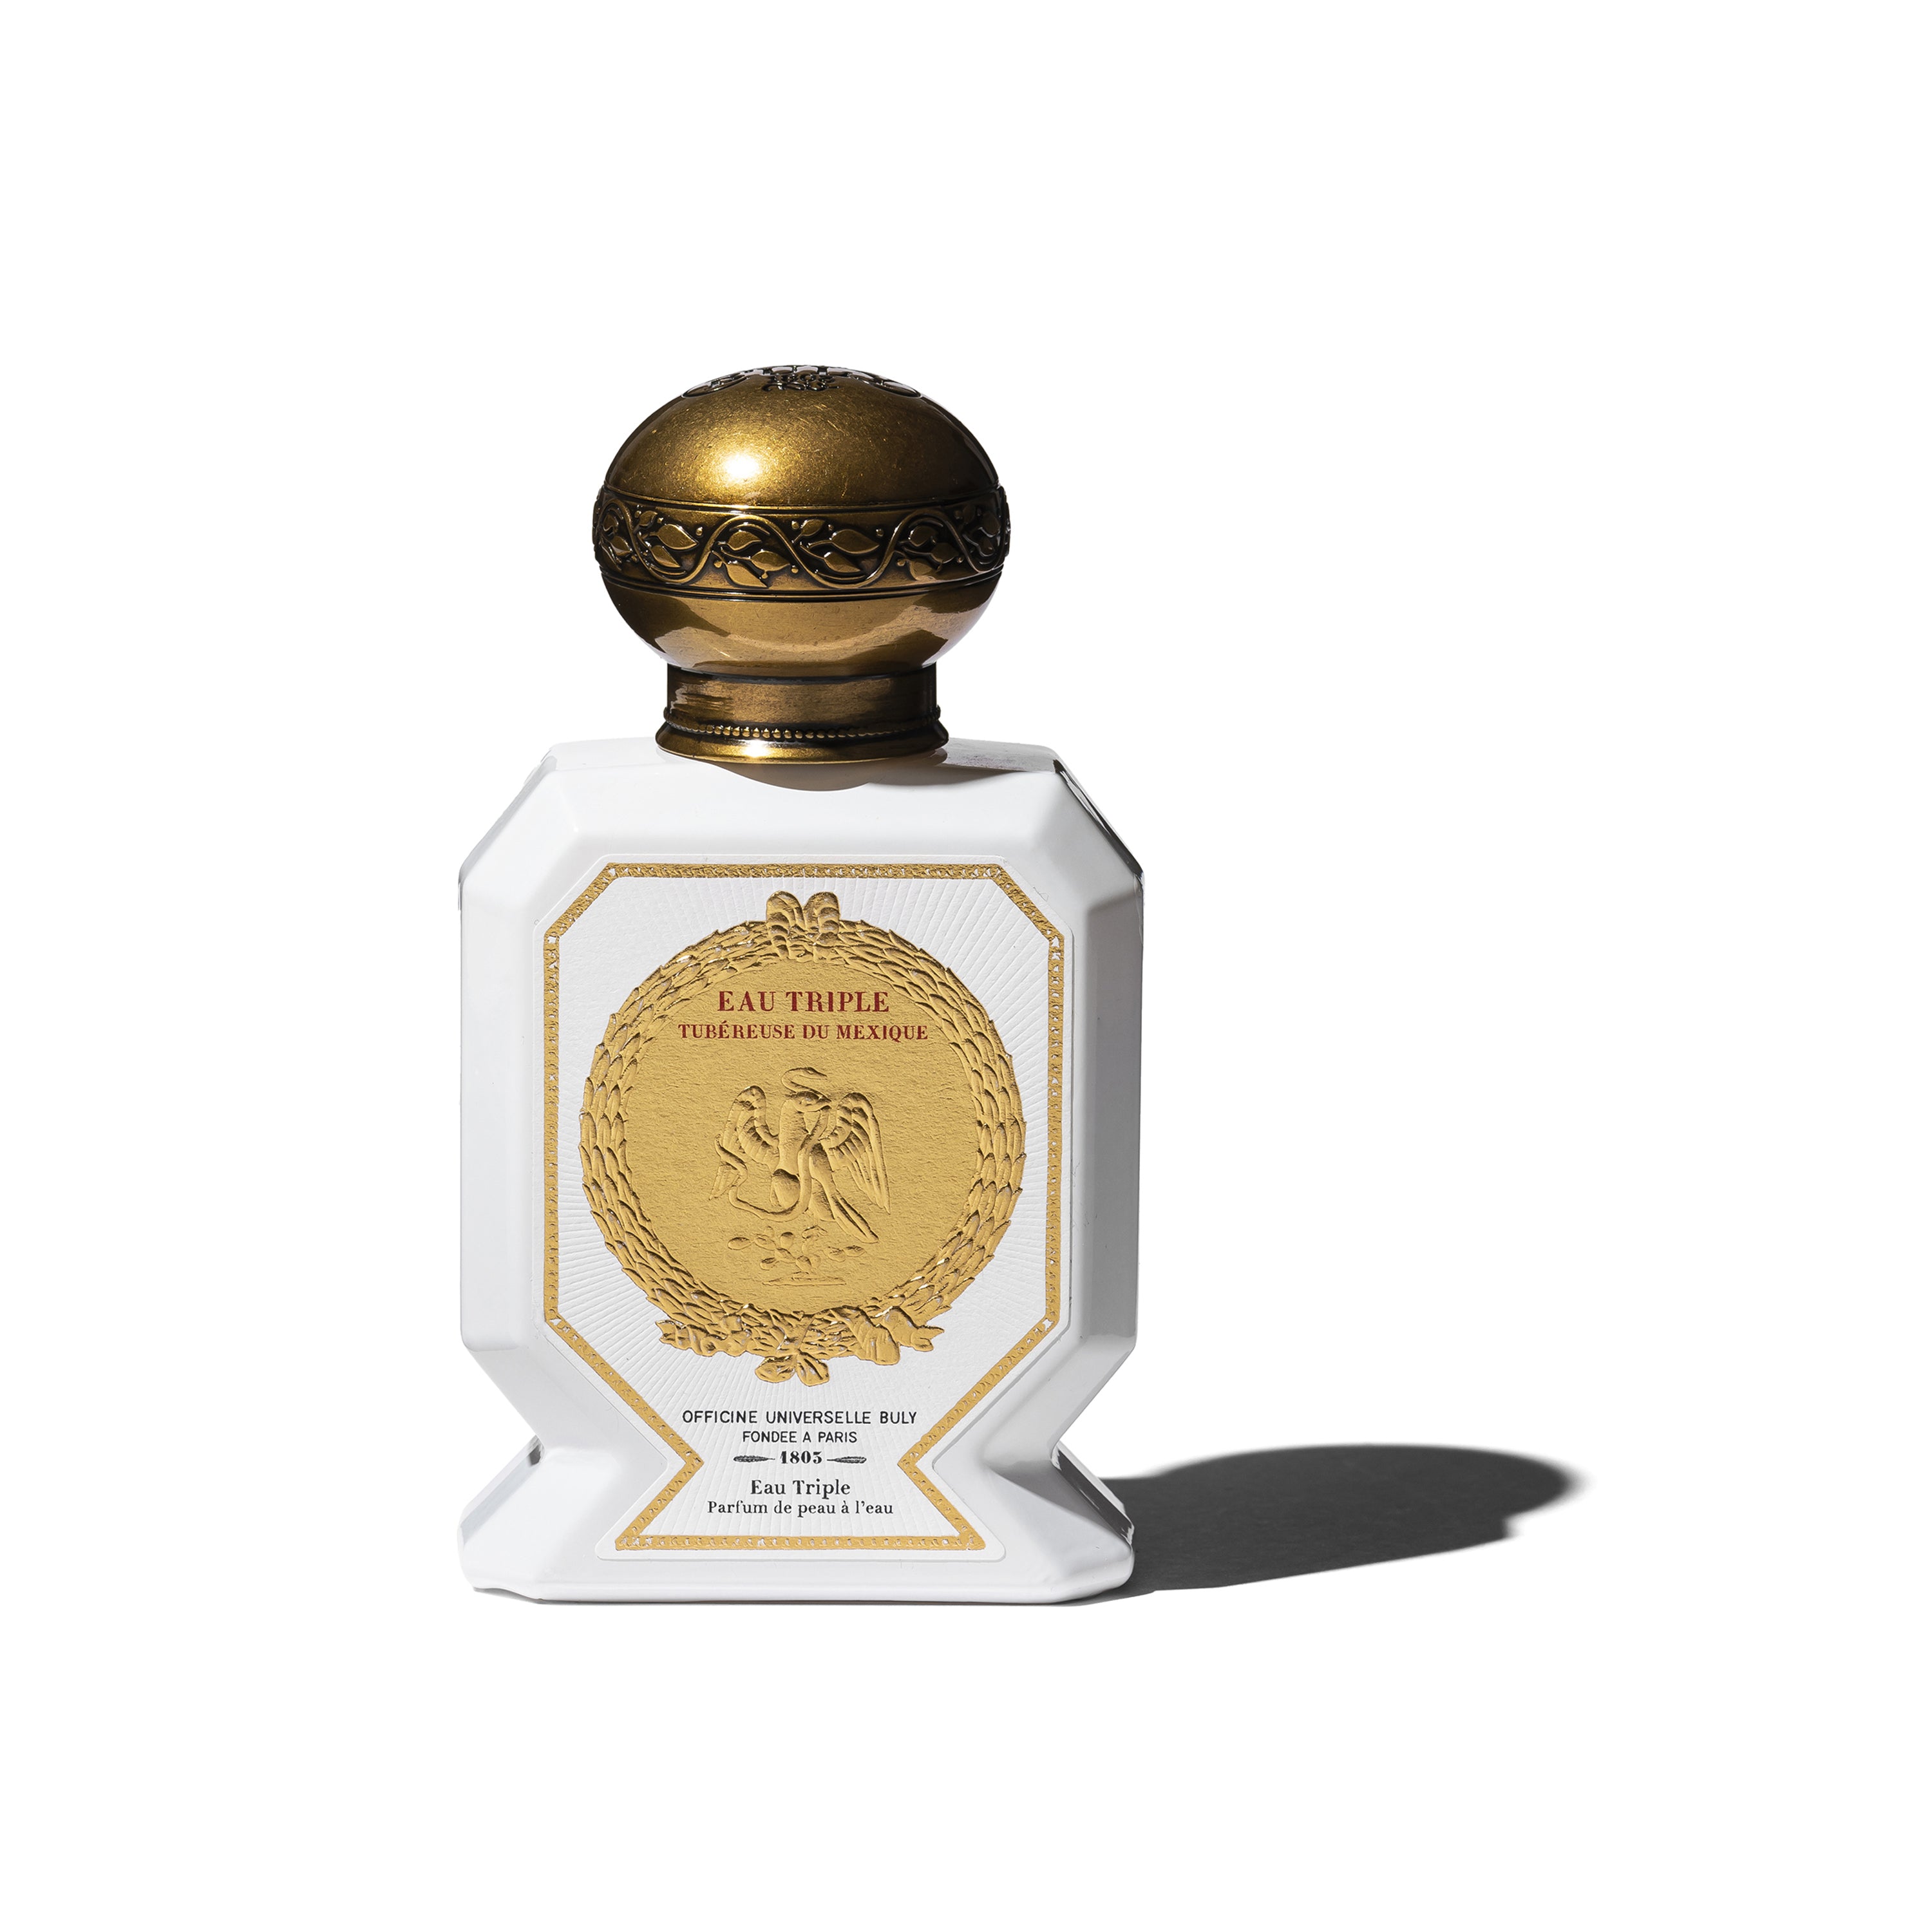 Q: Looking to get a bottle of fragrance as a gift. Do boutiques provide  this box also or only via online? : r/Louisvuitton